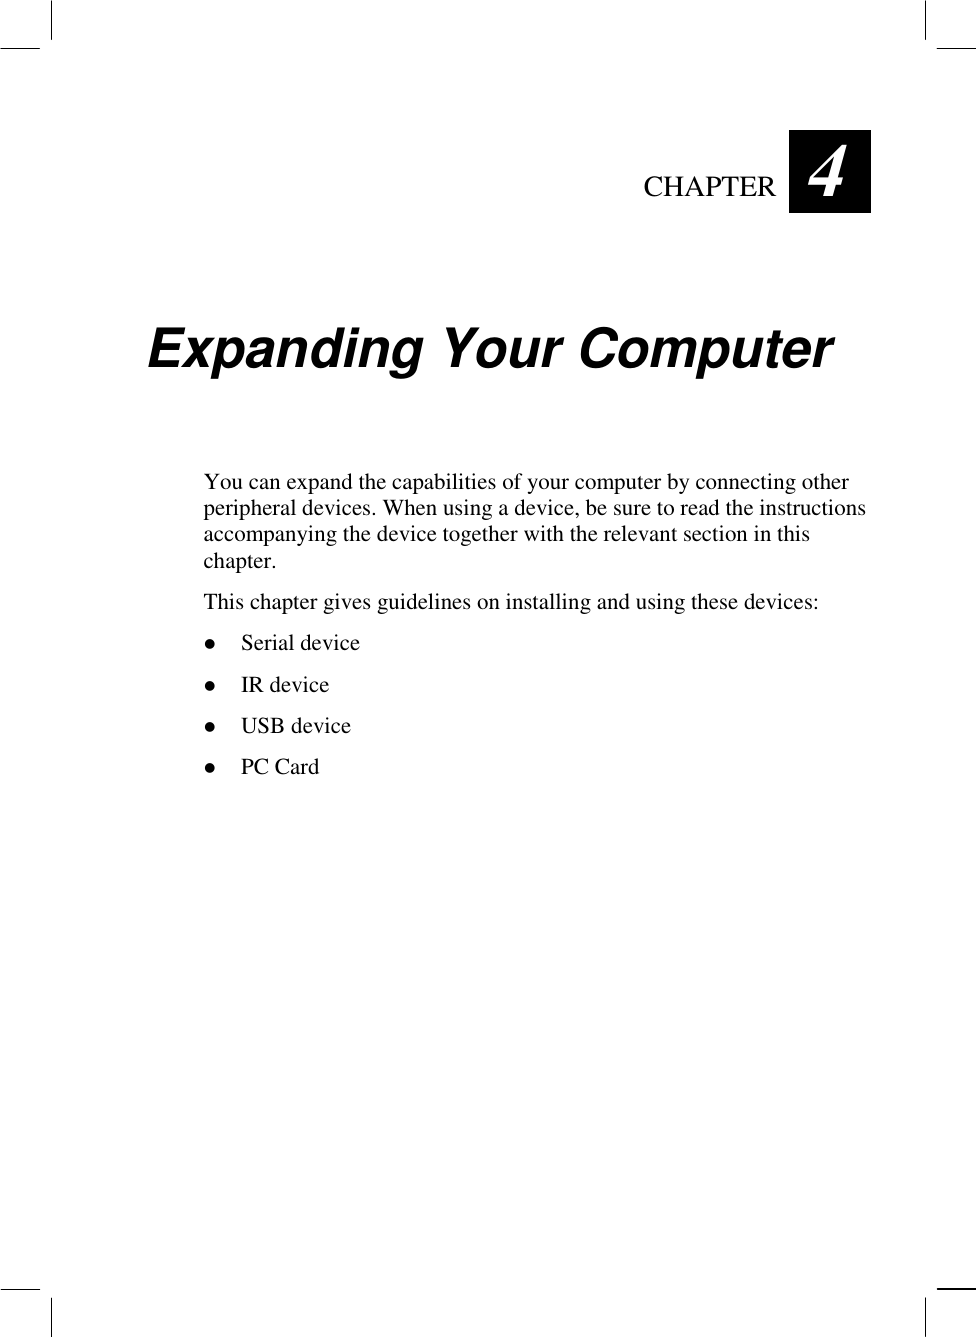   CHAPTER  4 Expanding Your Computer You can expand the capabilities of your computer by connecting other peripheral devices. When using a device, be sure to read the instructions accompanying the device together with the relevant section in this chapter. This chapter gives guidelines on installing and using these devices: !  Serial device !  IR device !  USB device !  PC Card  